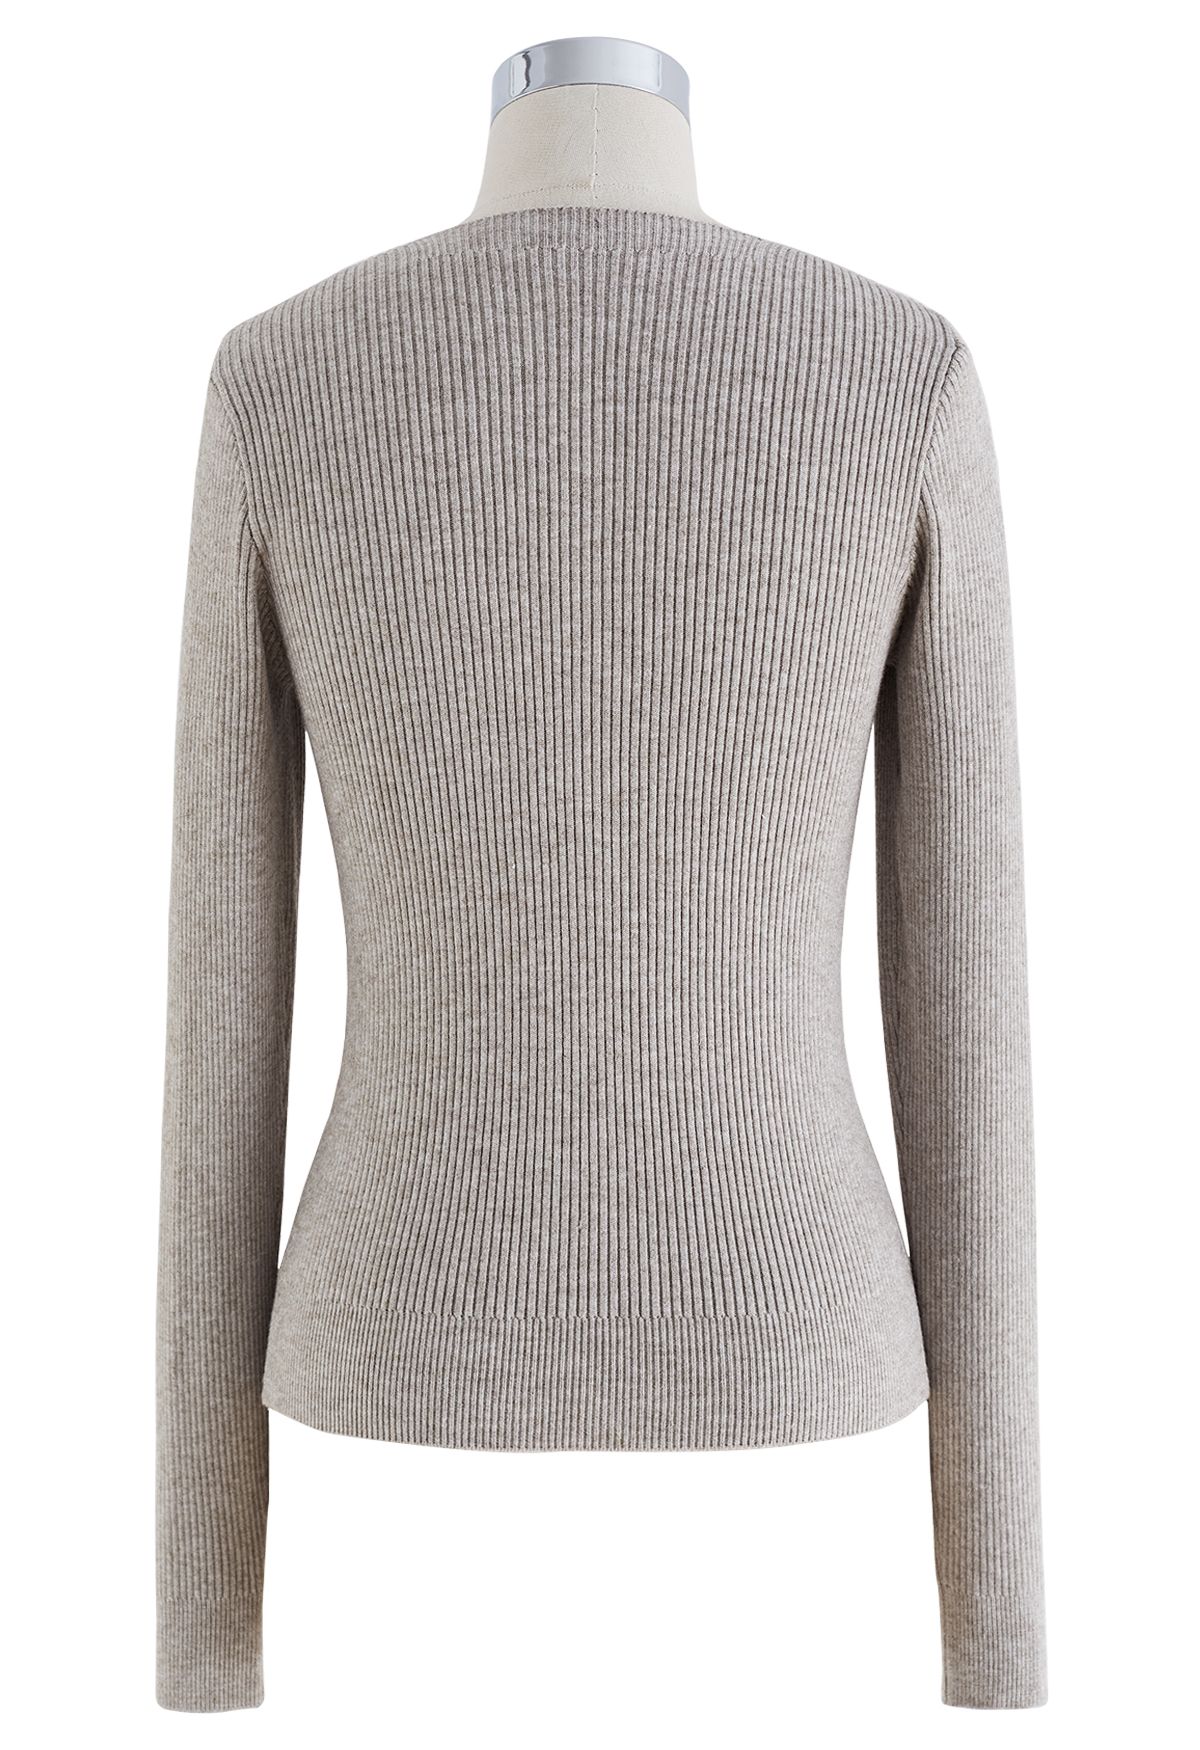 Sweetheart Twist Front Ribbed Knit Top in Linen